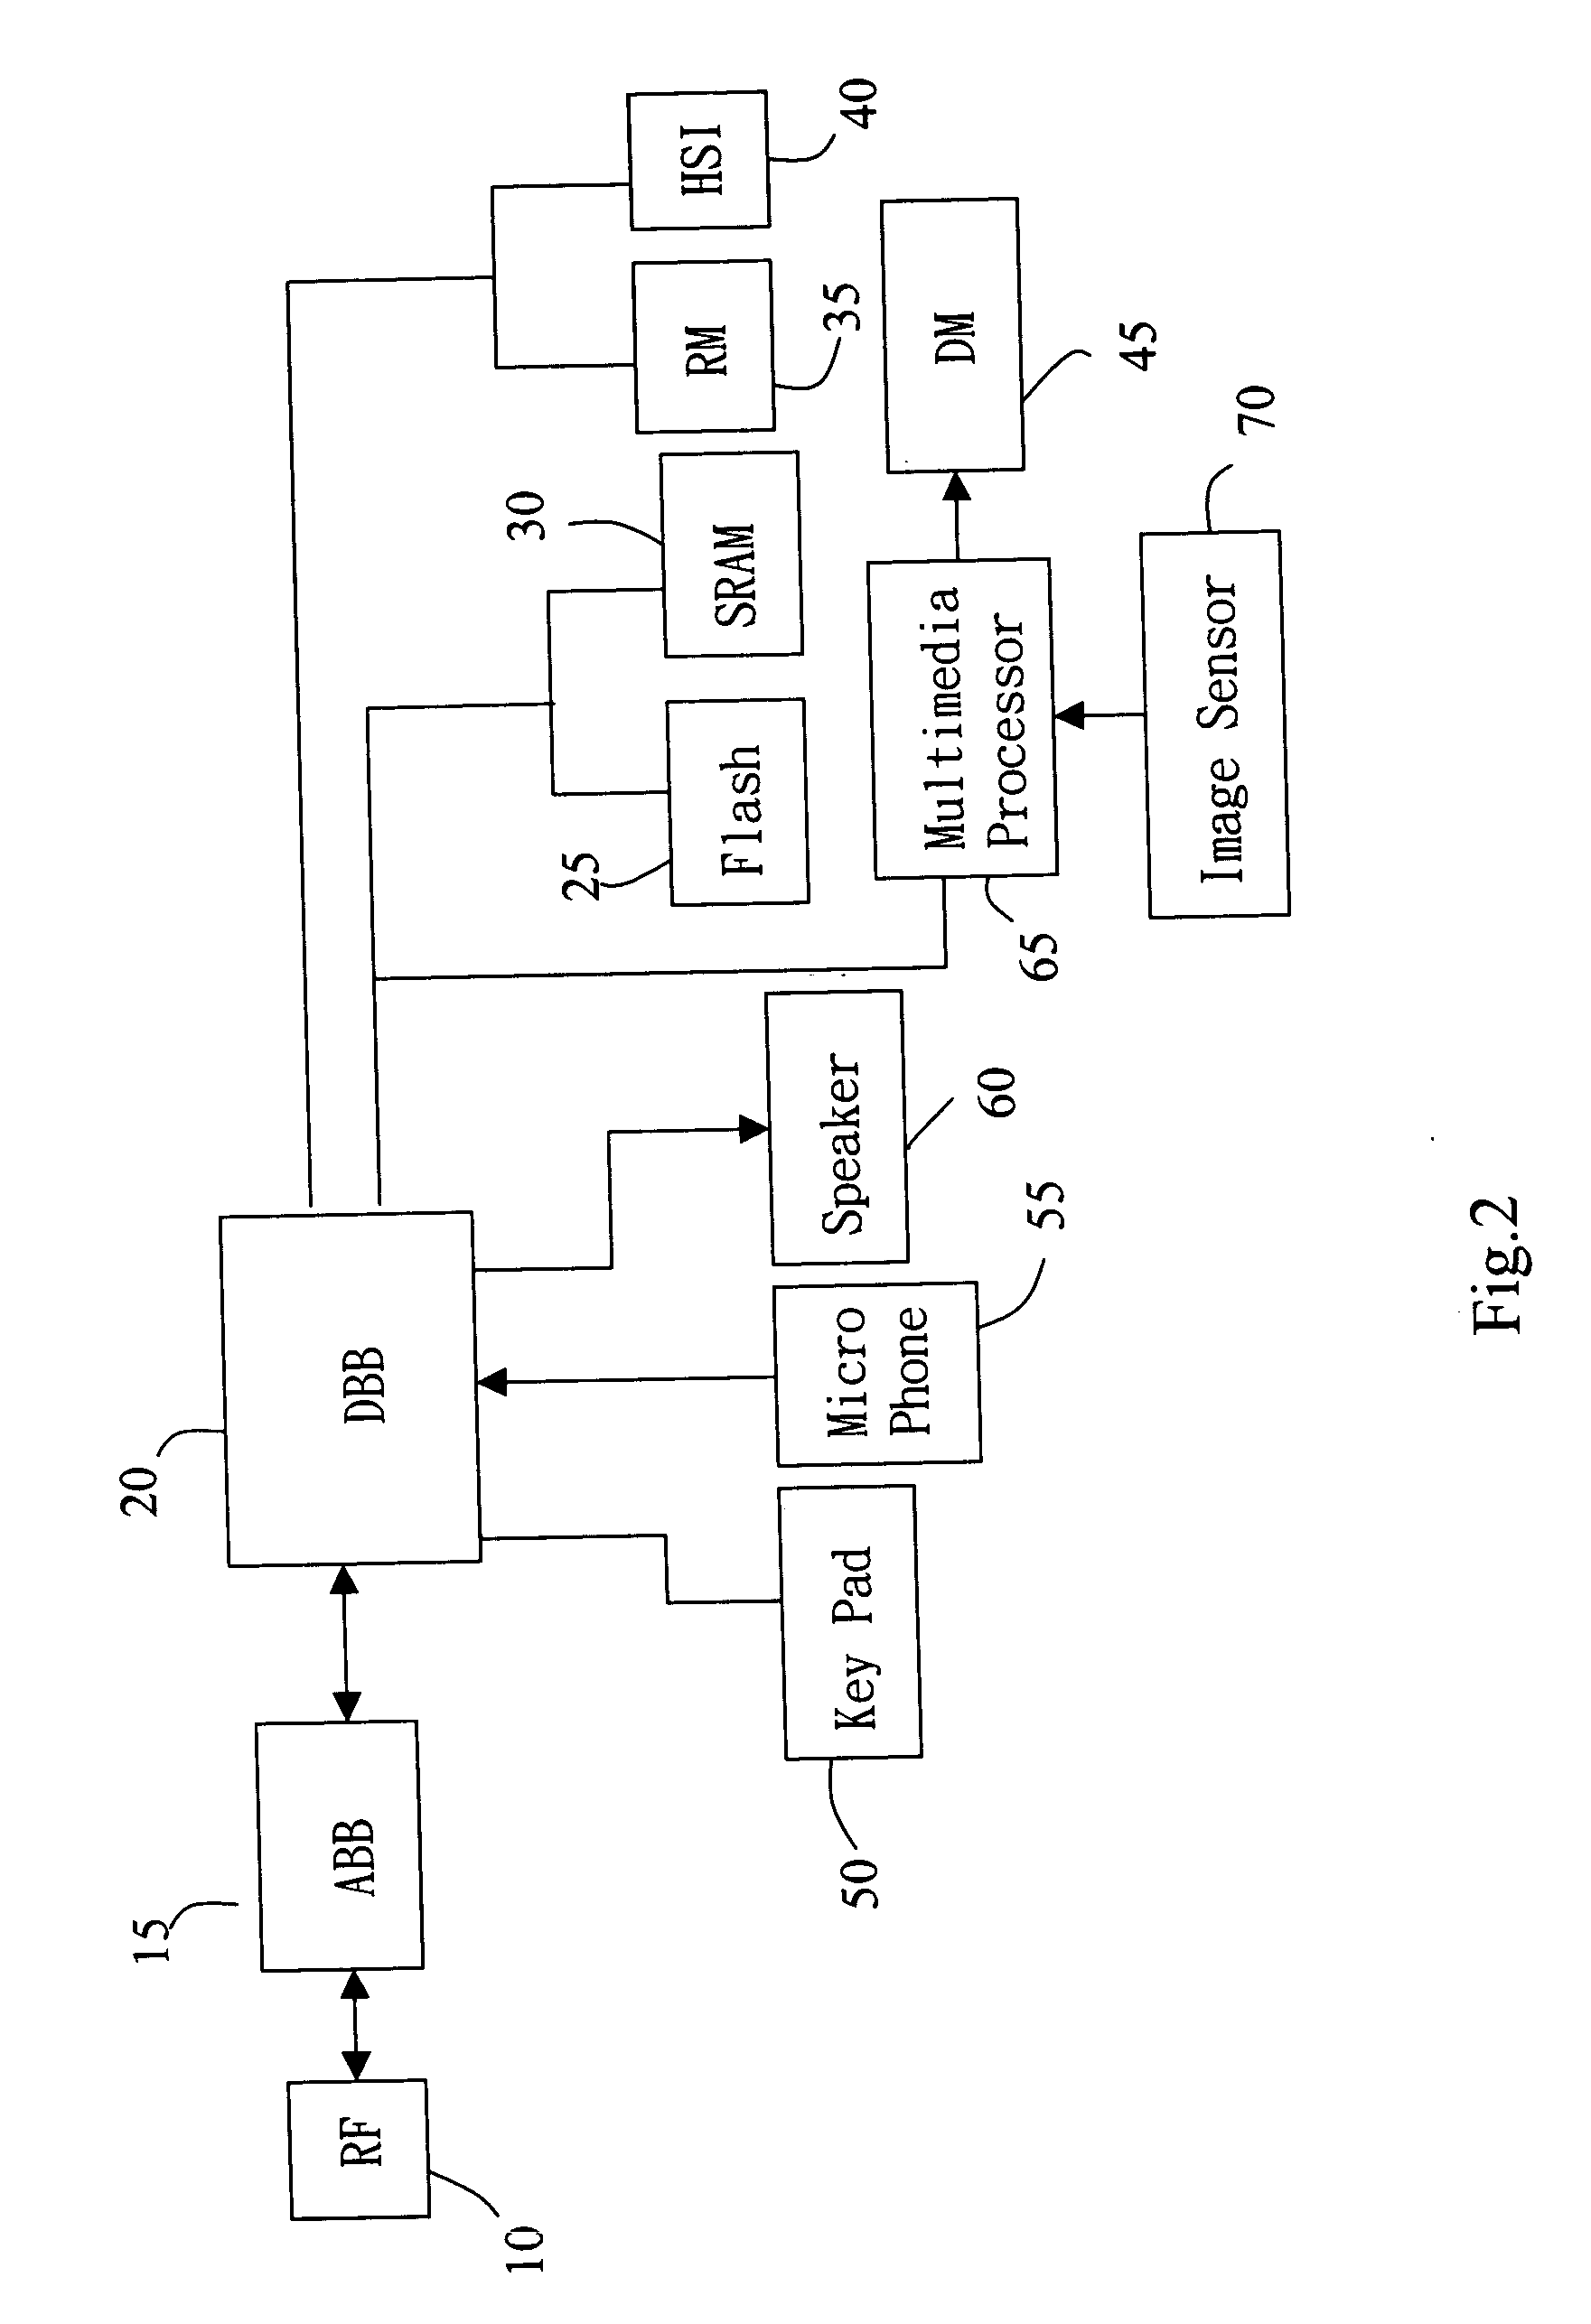 Mobile telephone system with media processor